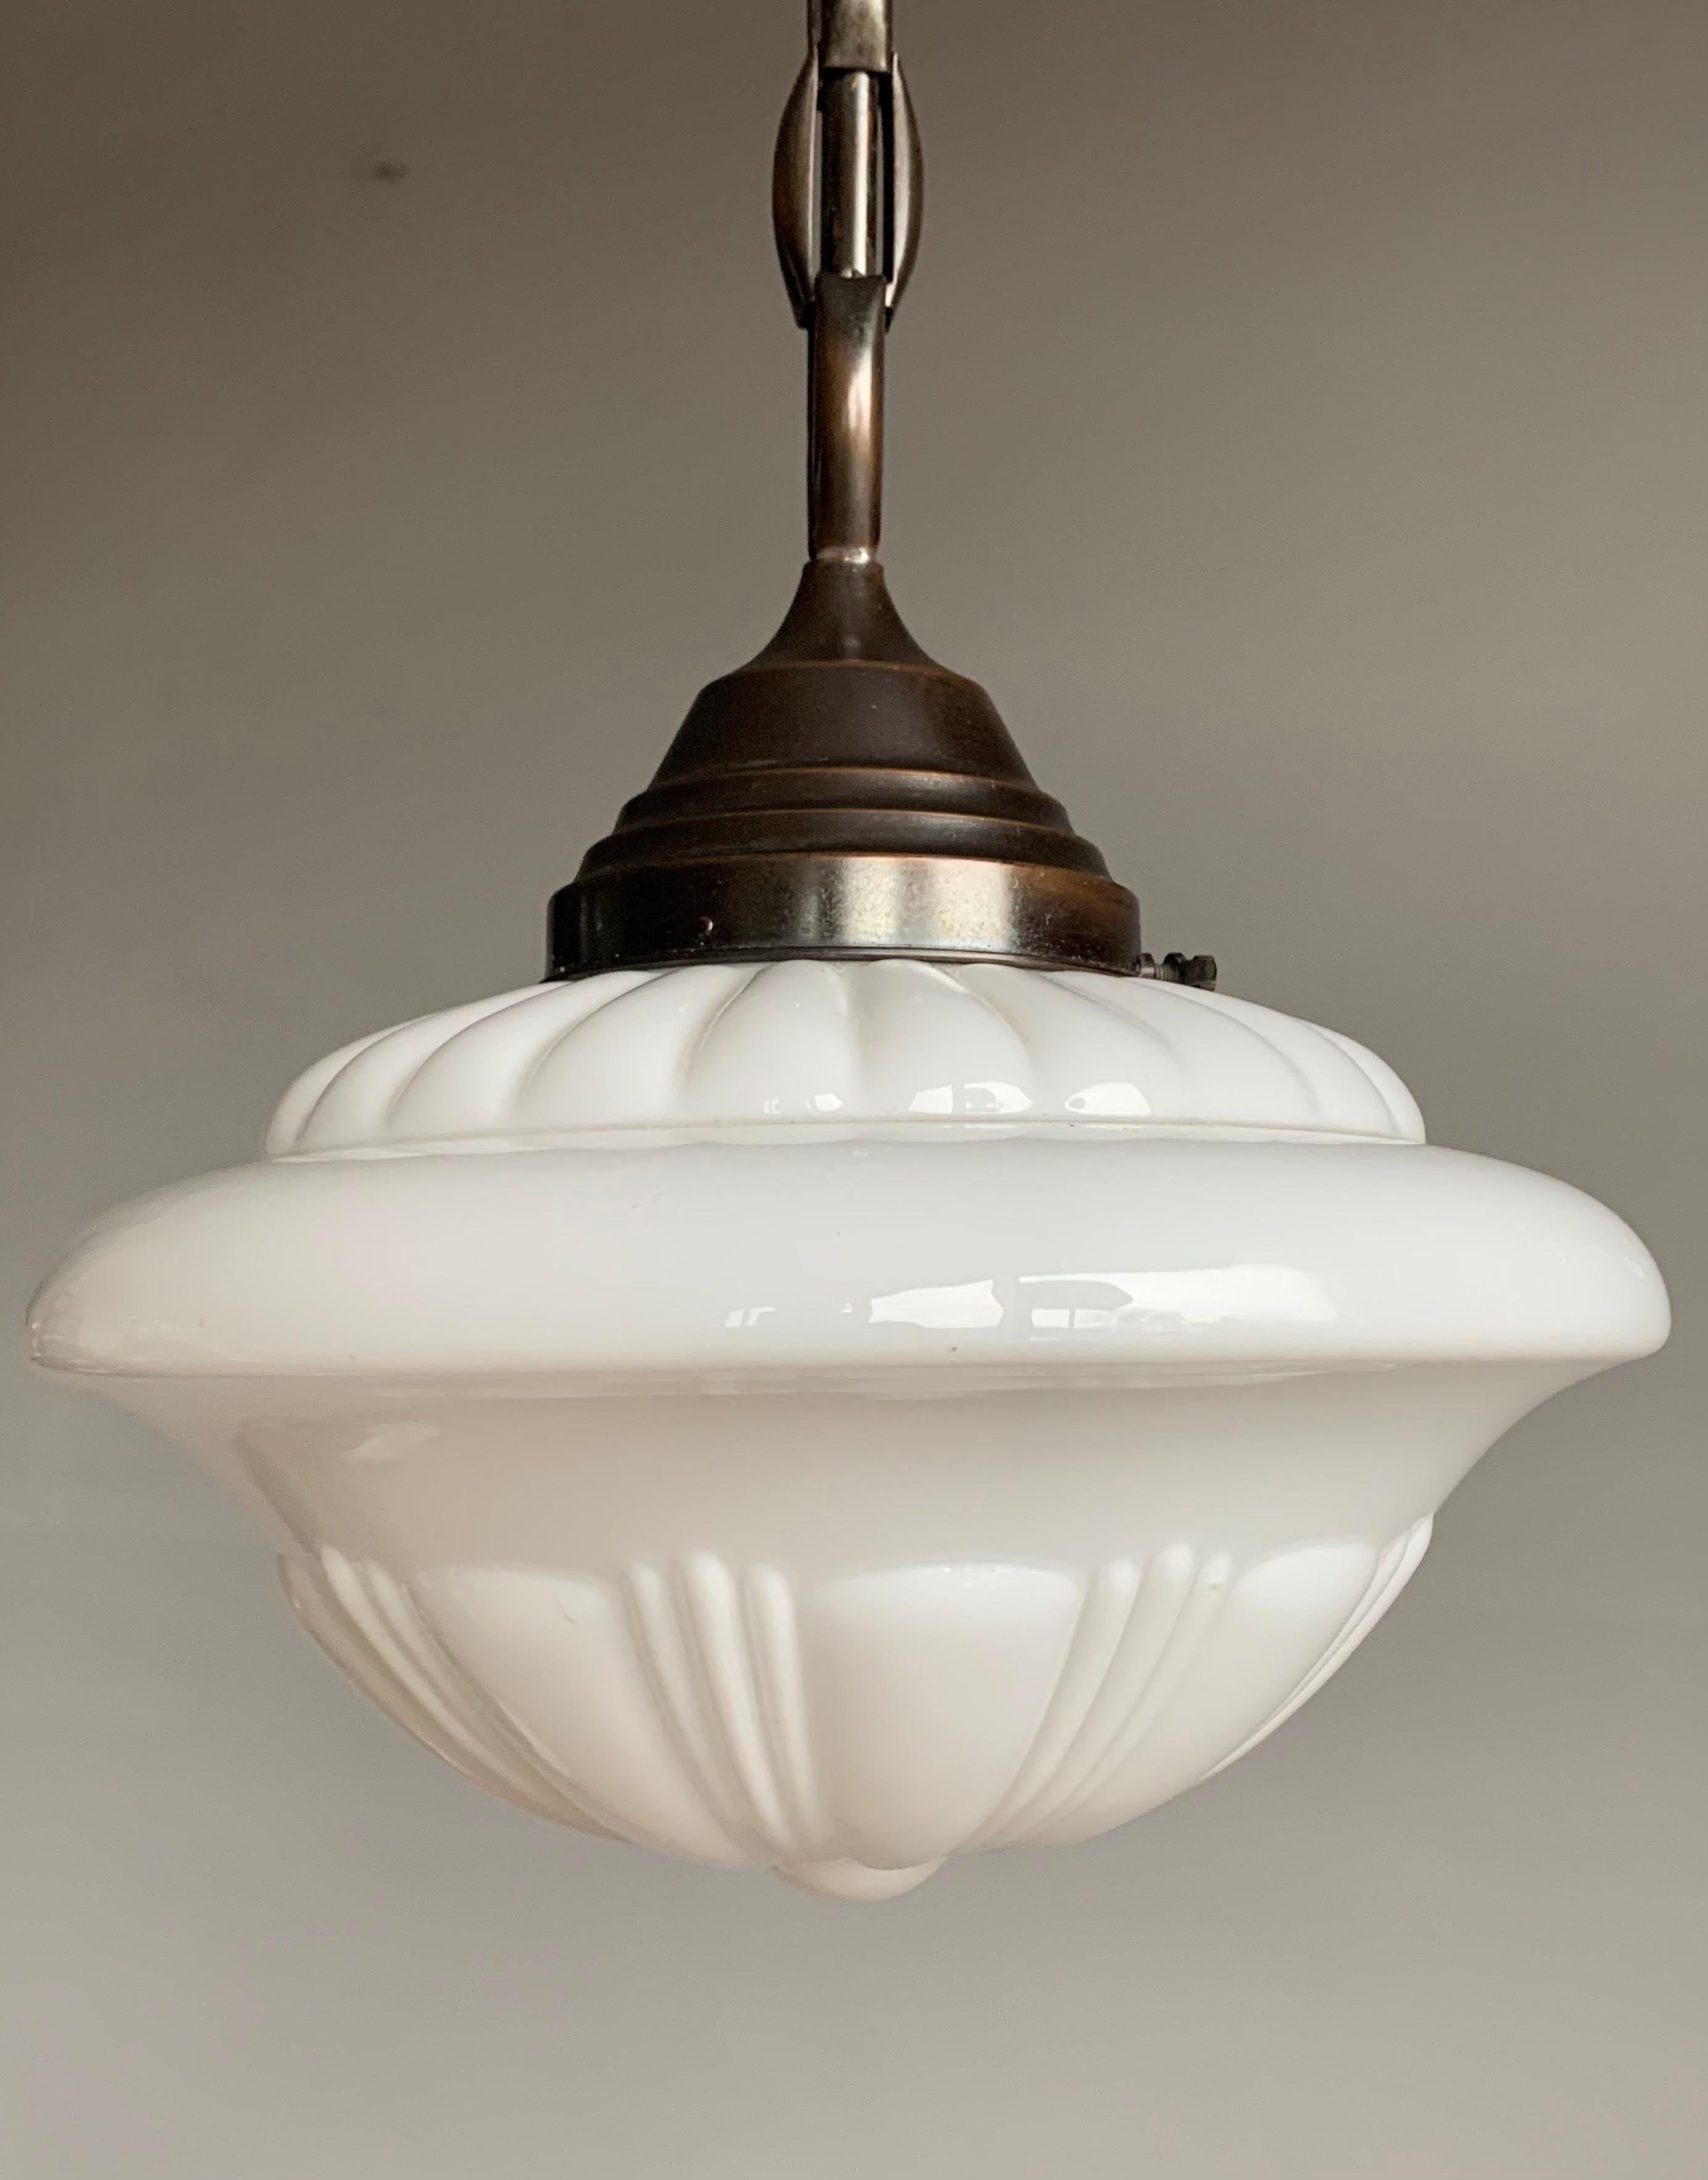 Hand-Crafted Early 1900s Rare Art Deco Pendant / Light with Opaline Glass Shade & Brass Chain